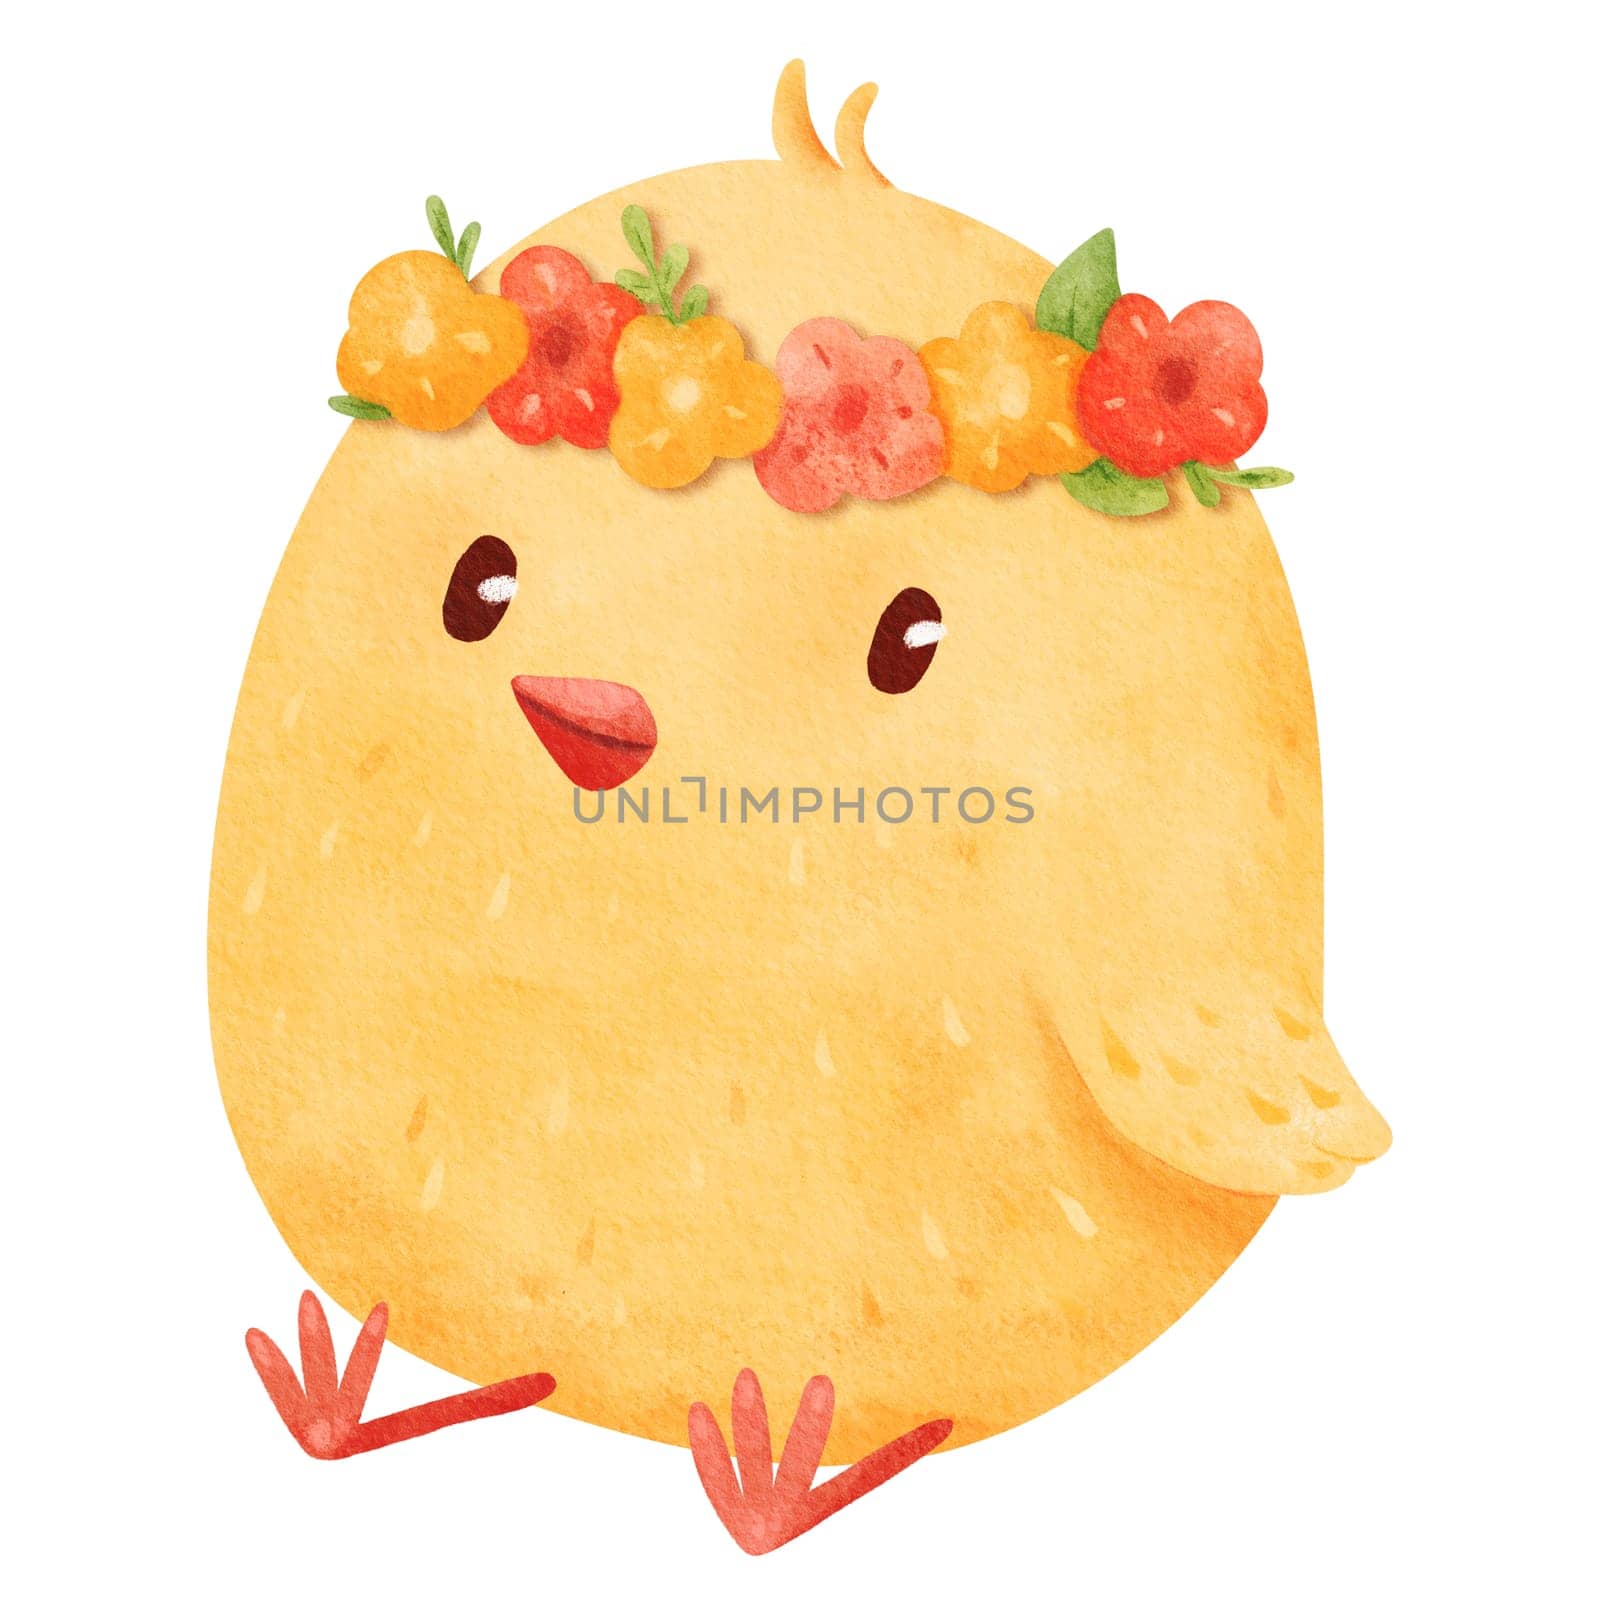 Charming, fluffy yellow chick sitting in a vibrant floral wreath. Cartoon-style illustration capturing the whimsical charm of a playful little bird. for conveying a cheerful and lively atmosphere by Art_Mari_Ka